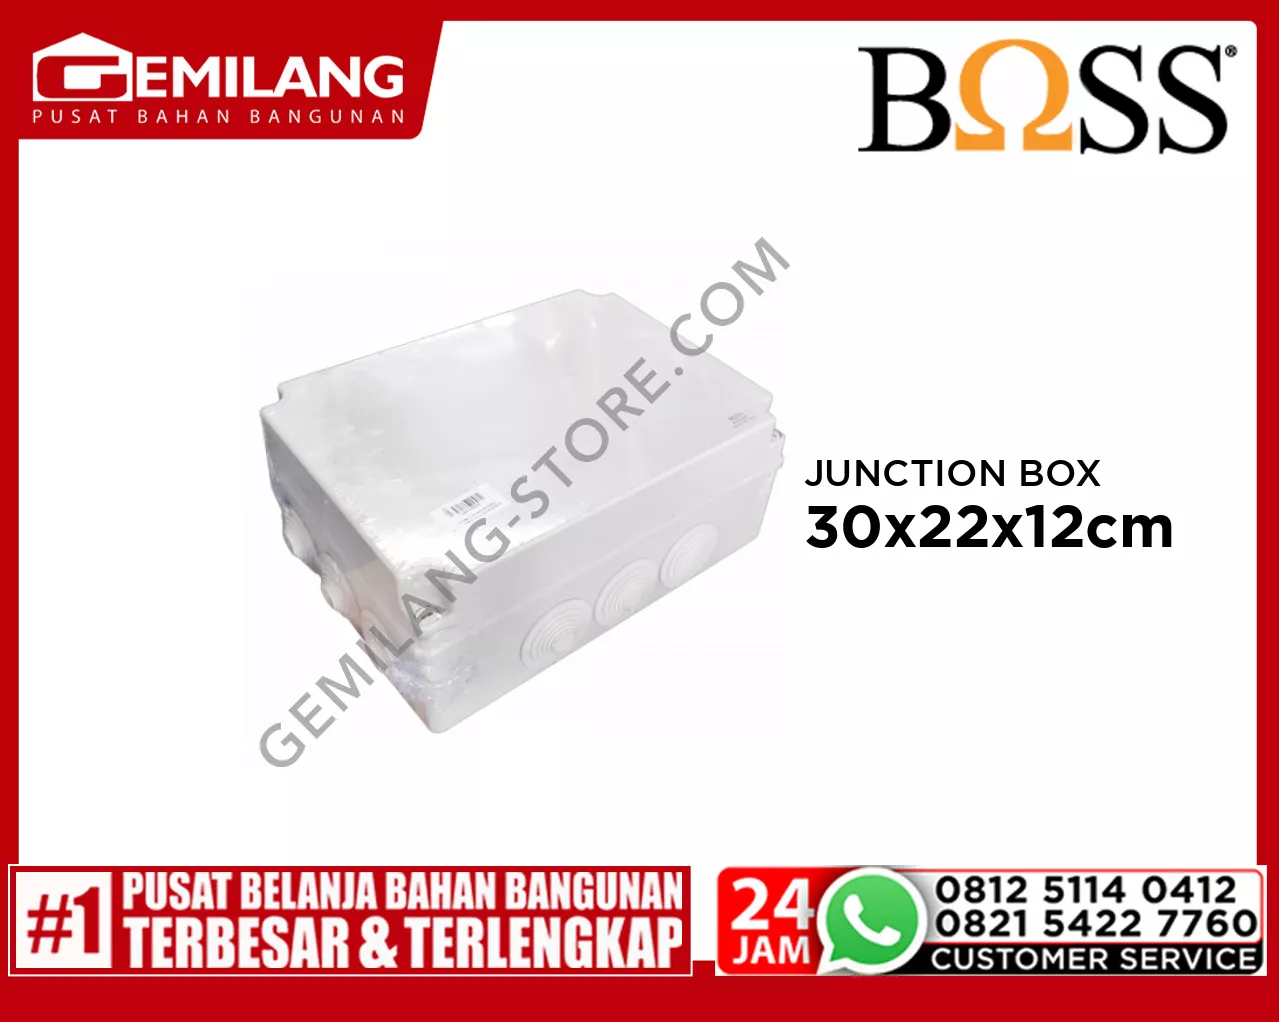 BOSS JUNCTION BOX W/CABLE SLEEVE 300 x 220 x 120 BJBS3022